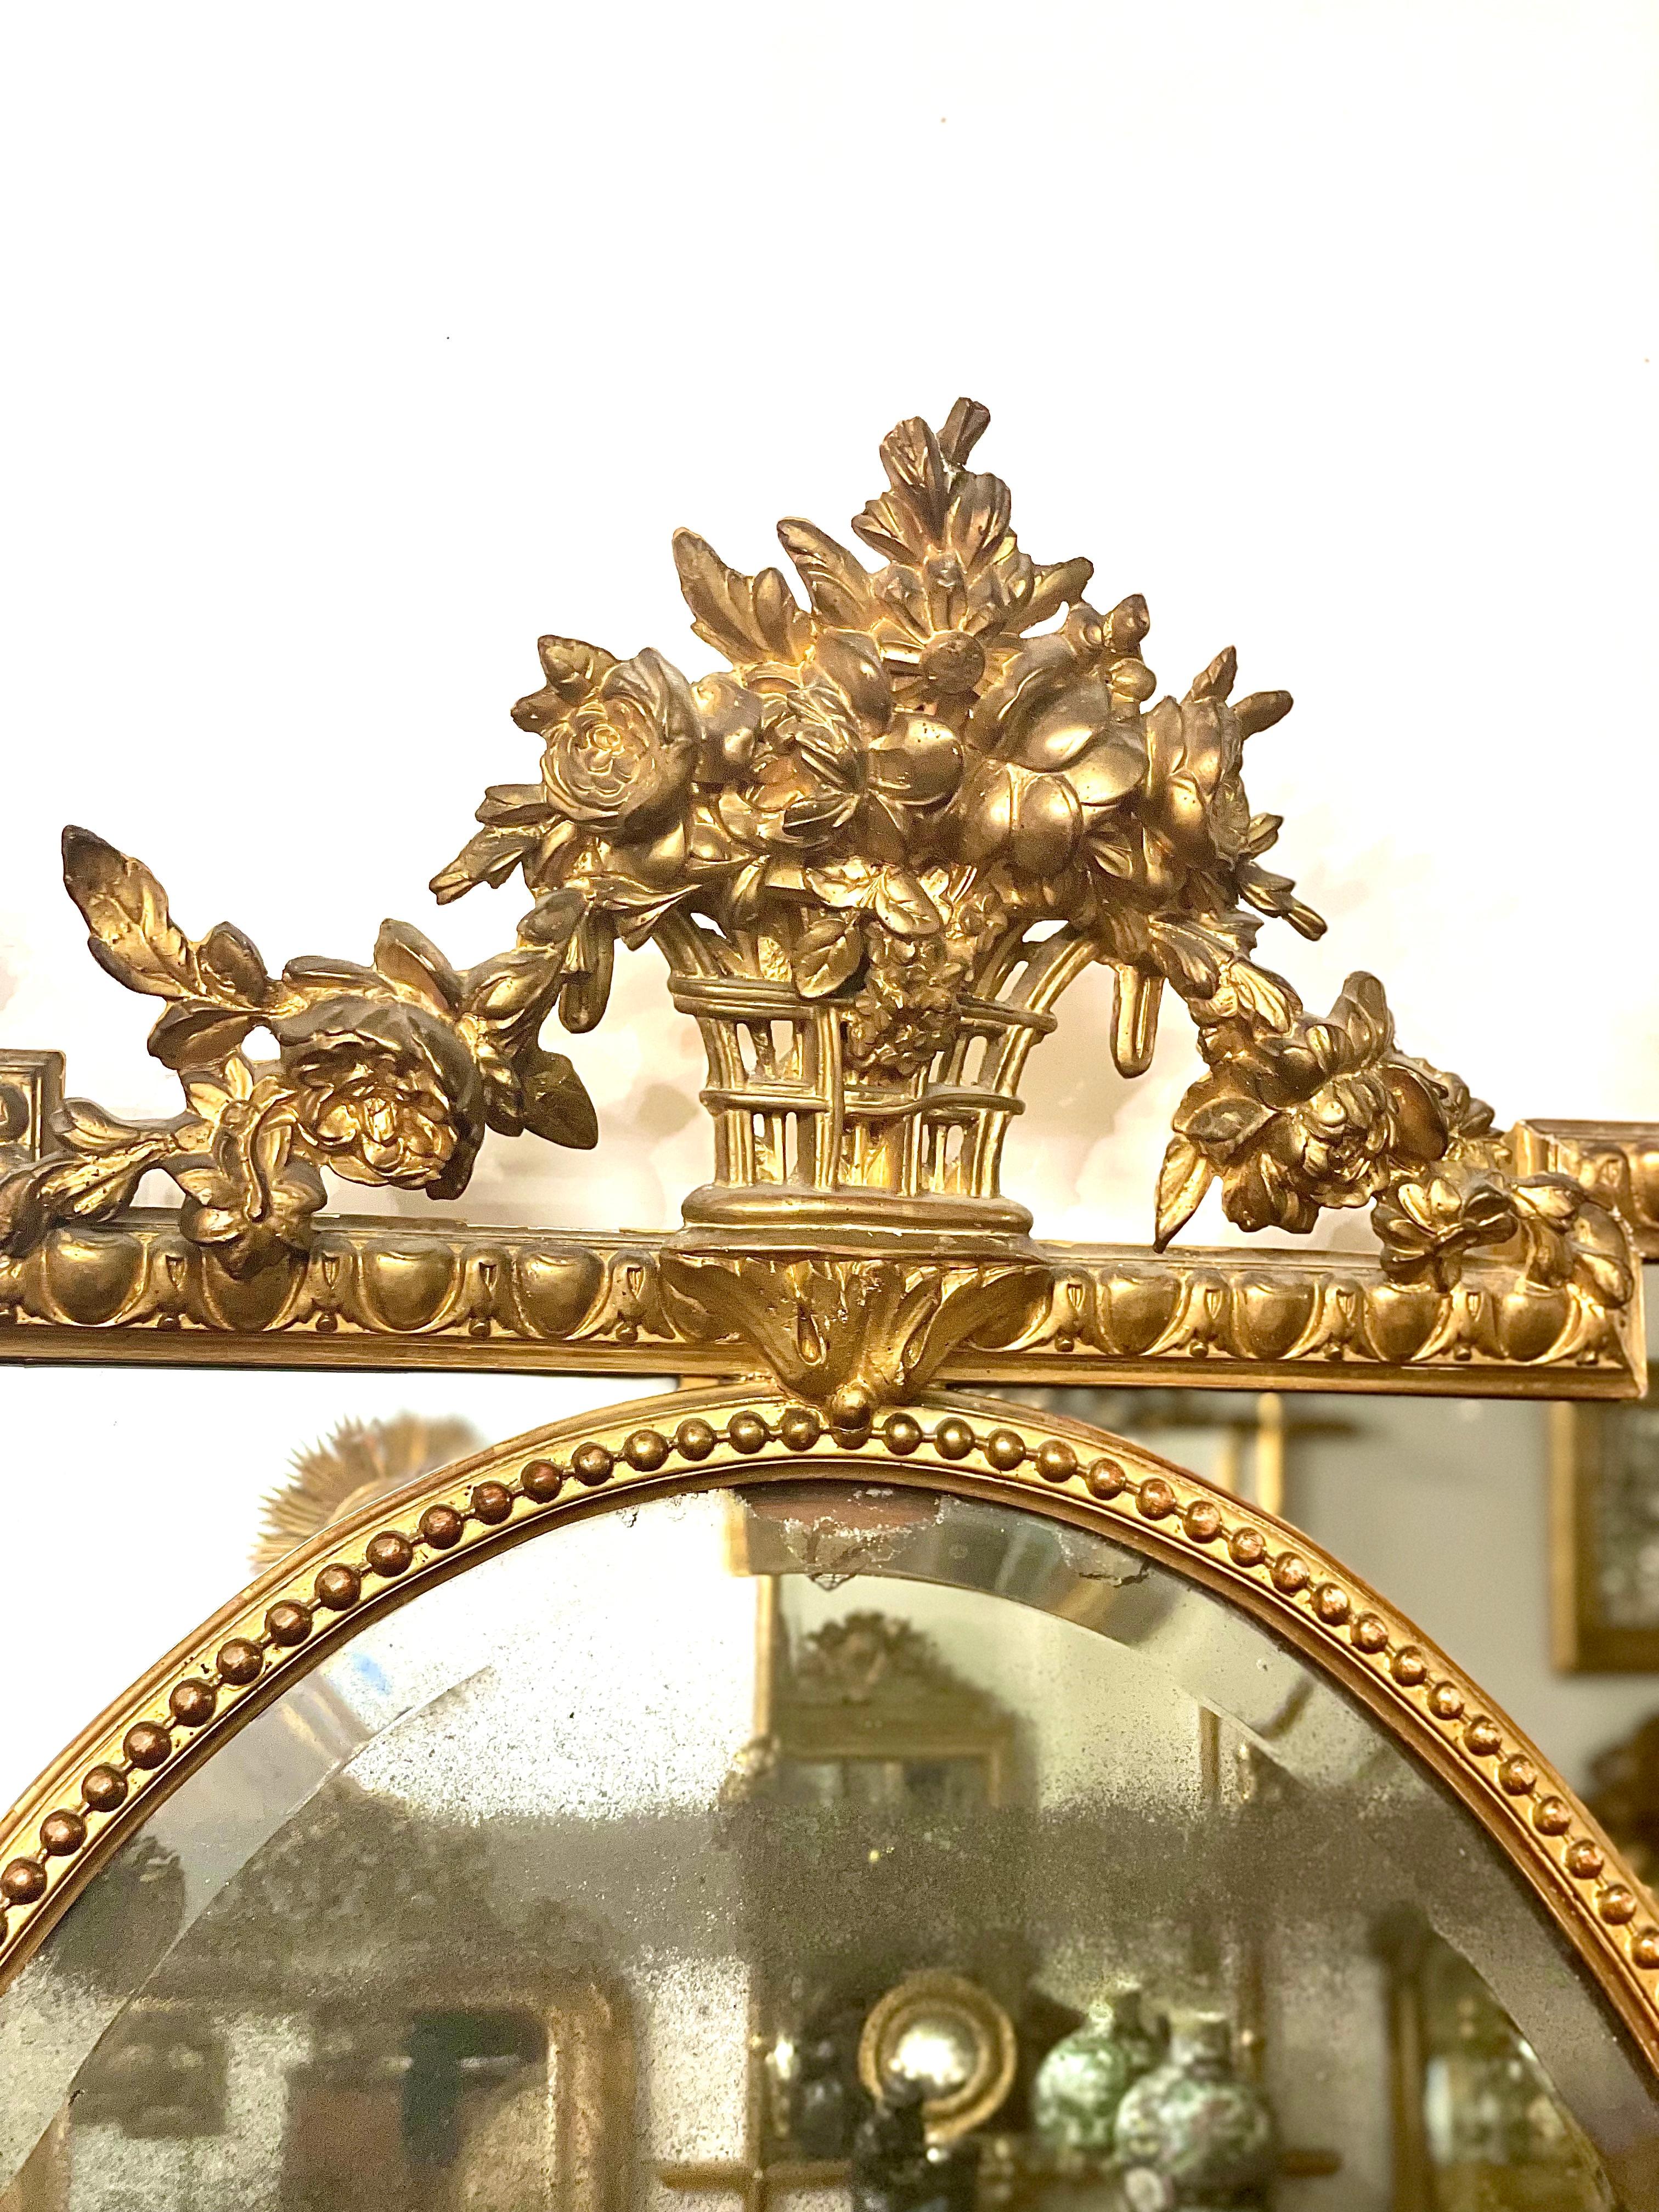 A gorgeous and imposing Napoleon III period wall mirror, with parcloses, in moulded, carved stucco and gilded wood. The haut-relief outer frame is decorated with stepped corners, egg-and-dart mouldings and ornate decoration to three sides, while the